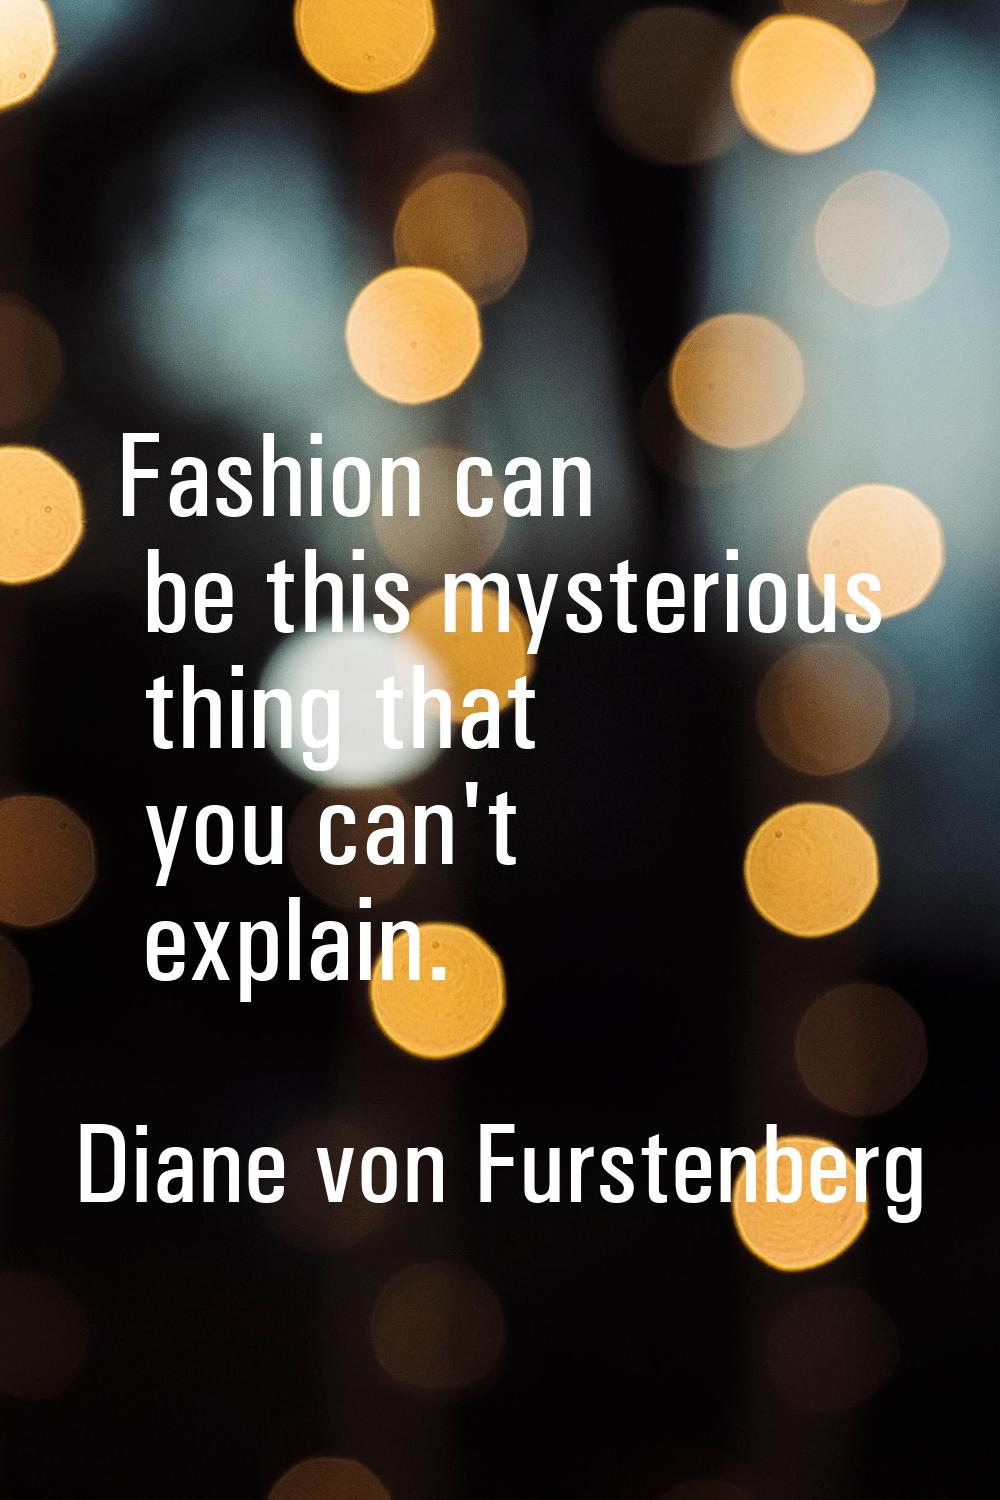 Fashion can be this mysterious thing that you can't explain.